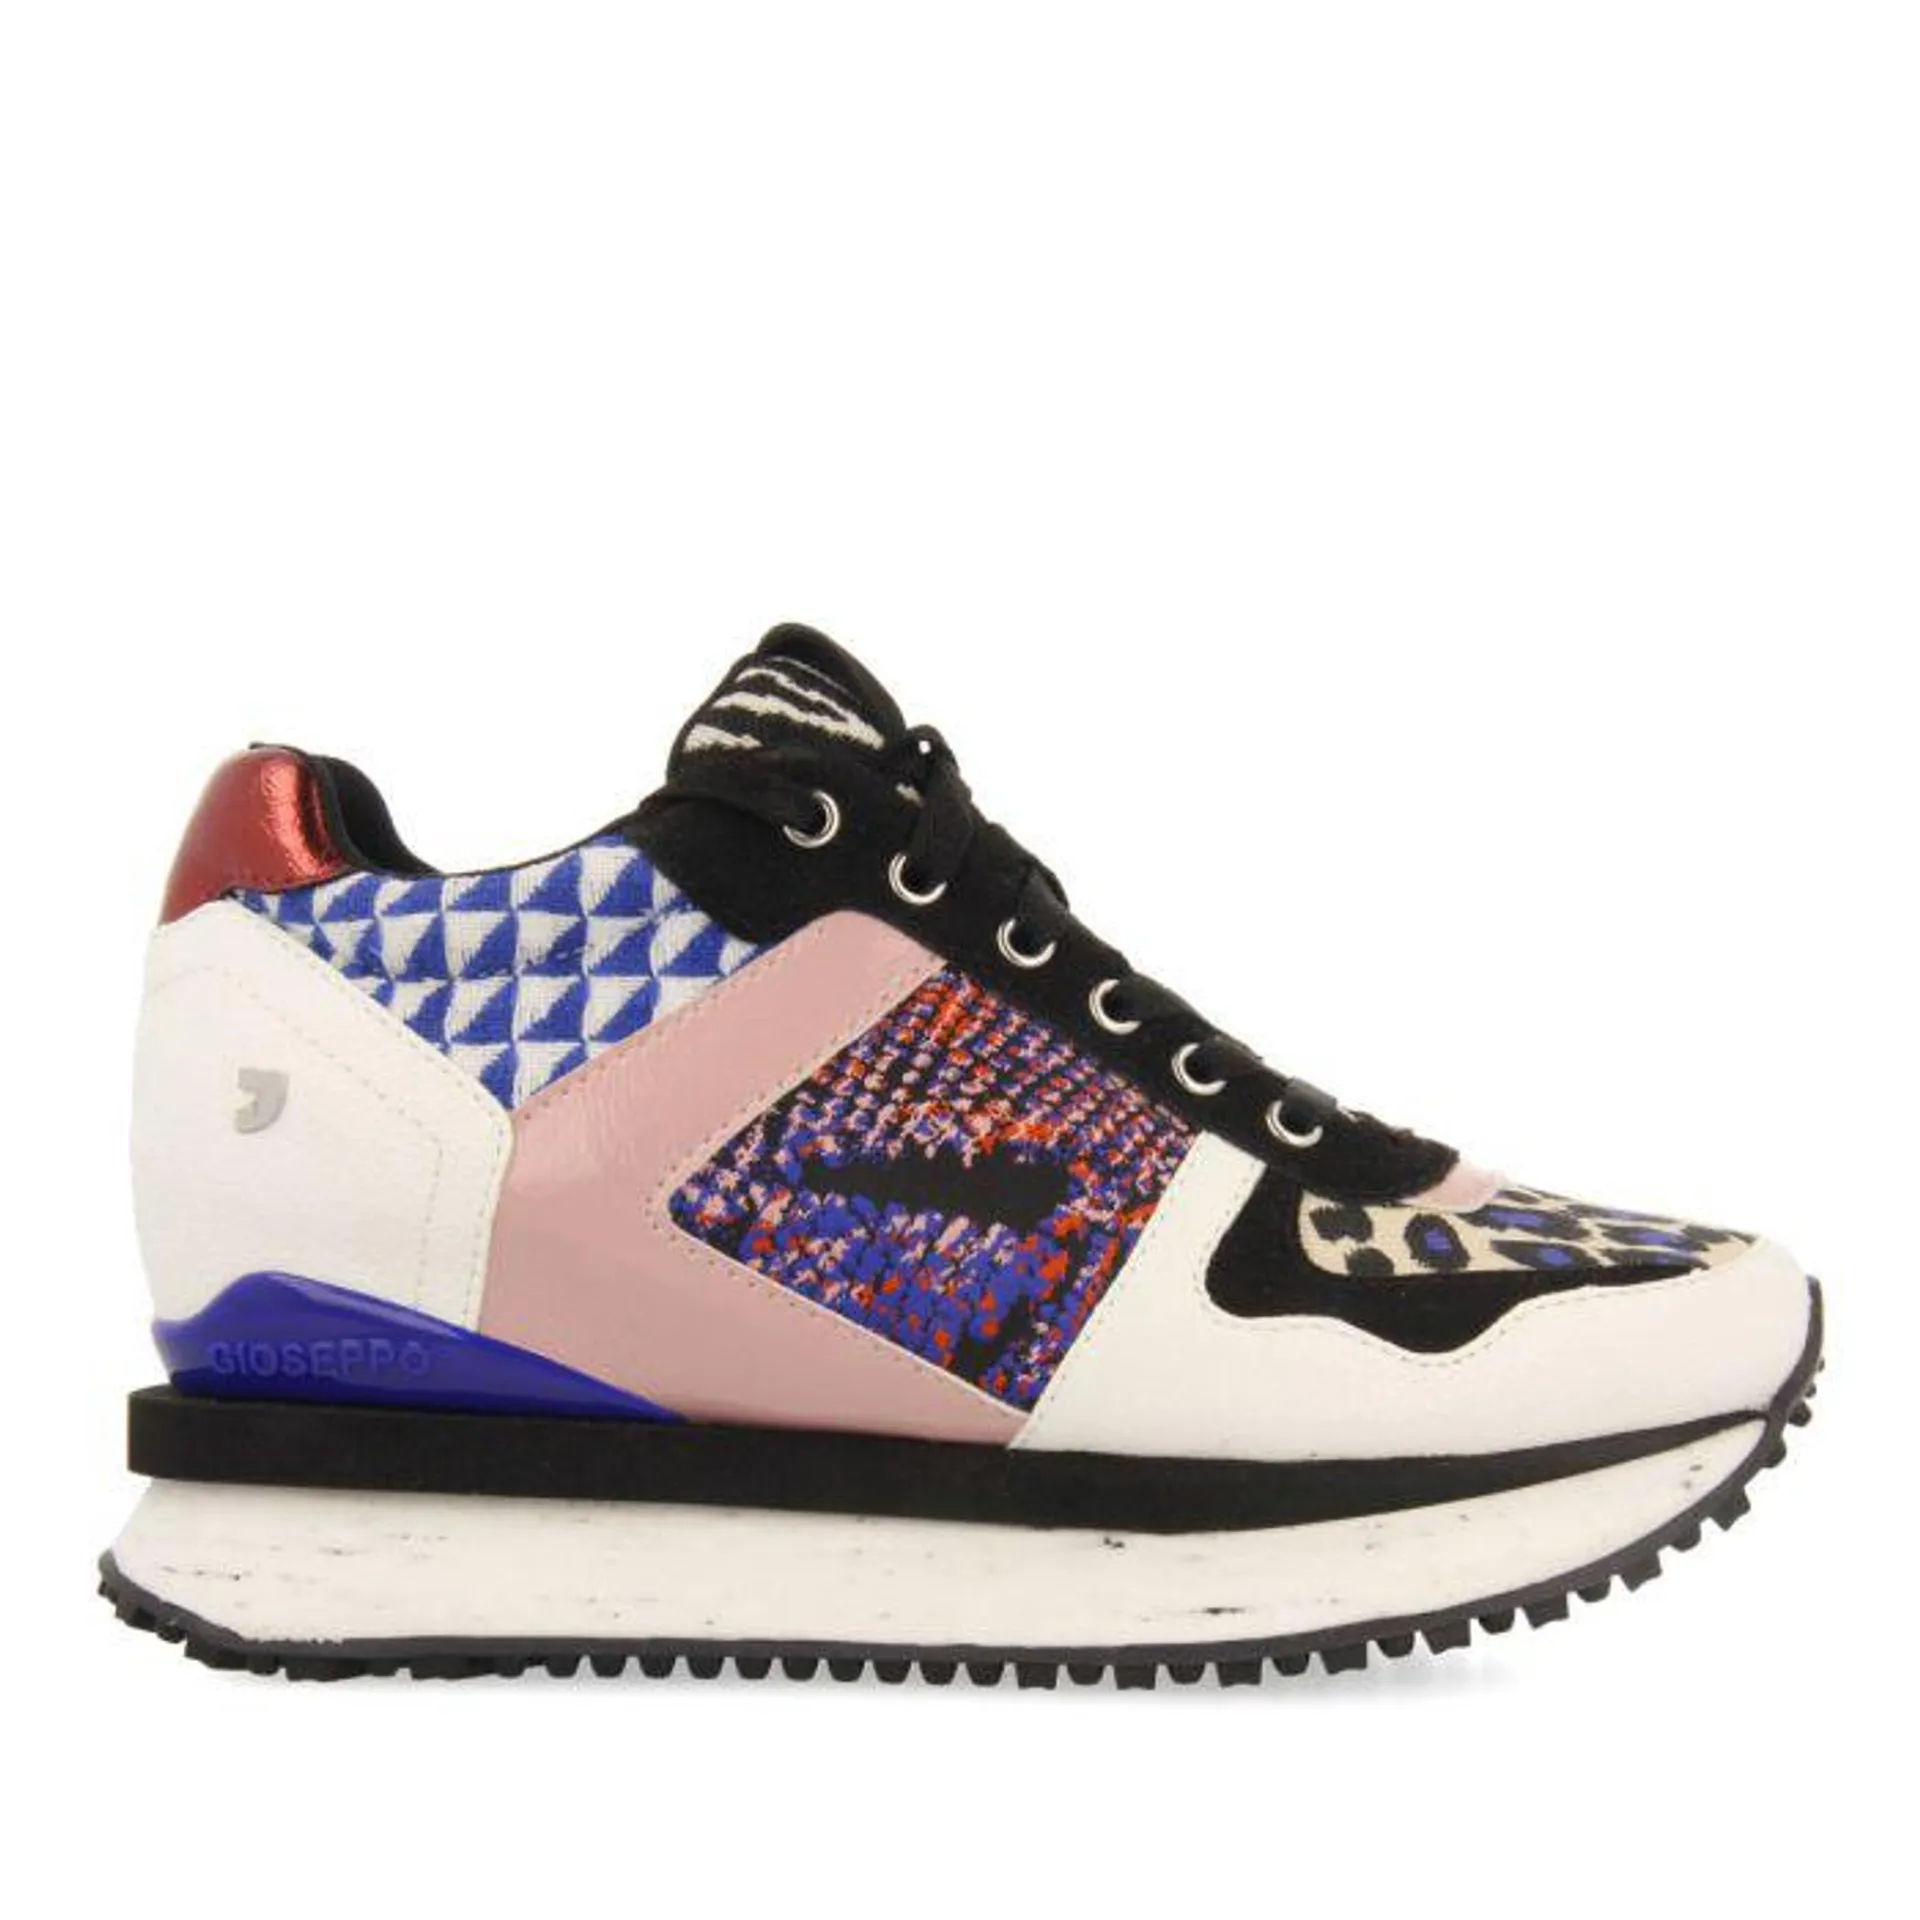 Findel women's multicoloured sneakers with inner wedges, black and white pieces and red, blue and pink details